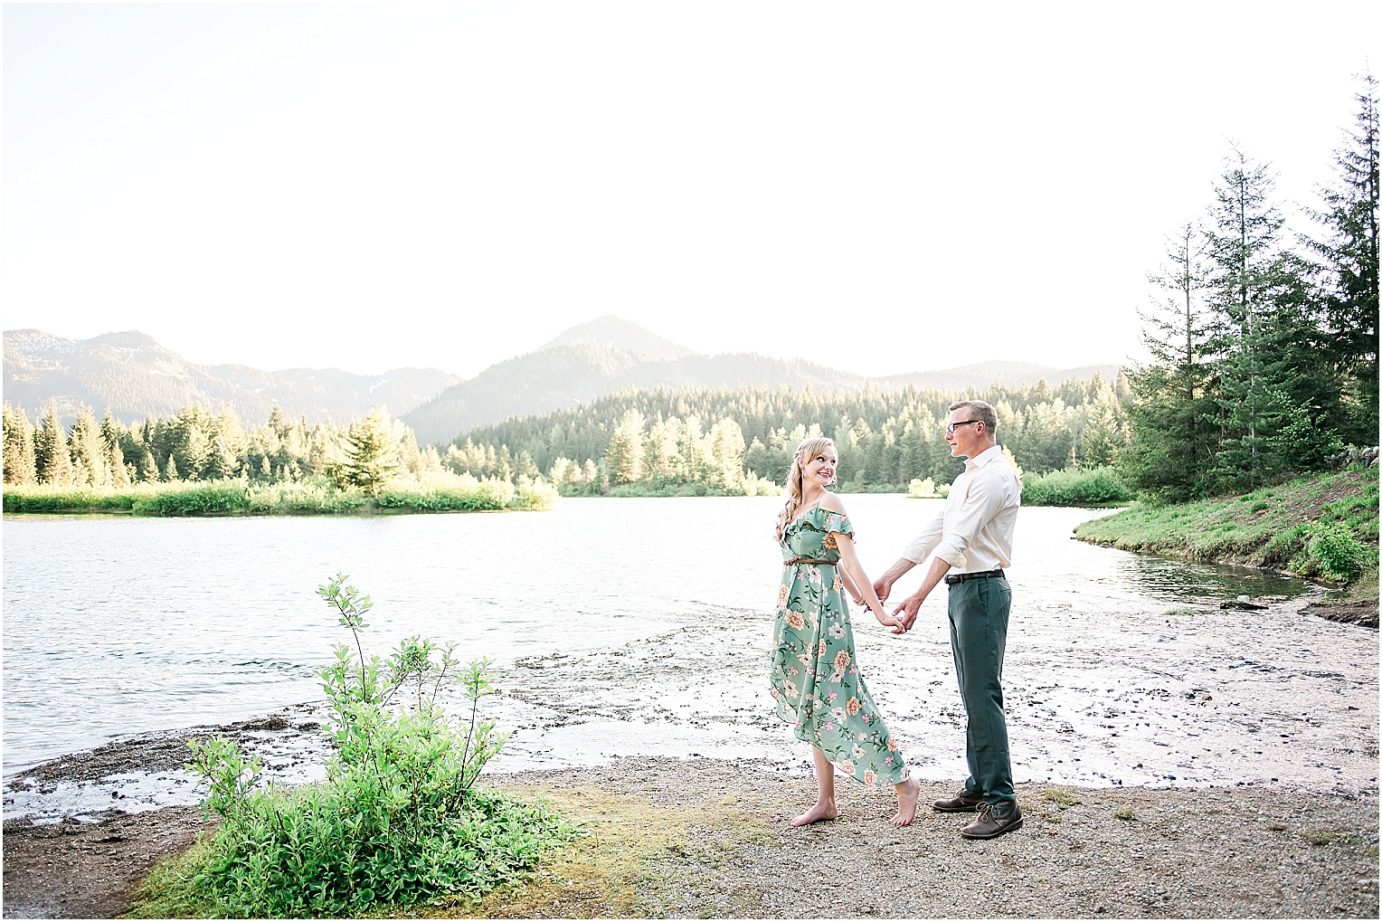 Snoqualmie Pass engagement session snoqualmie pass wa Chris and Cassiah next to Gold Creek Pond